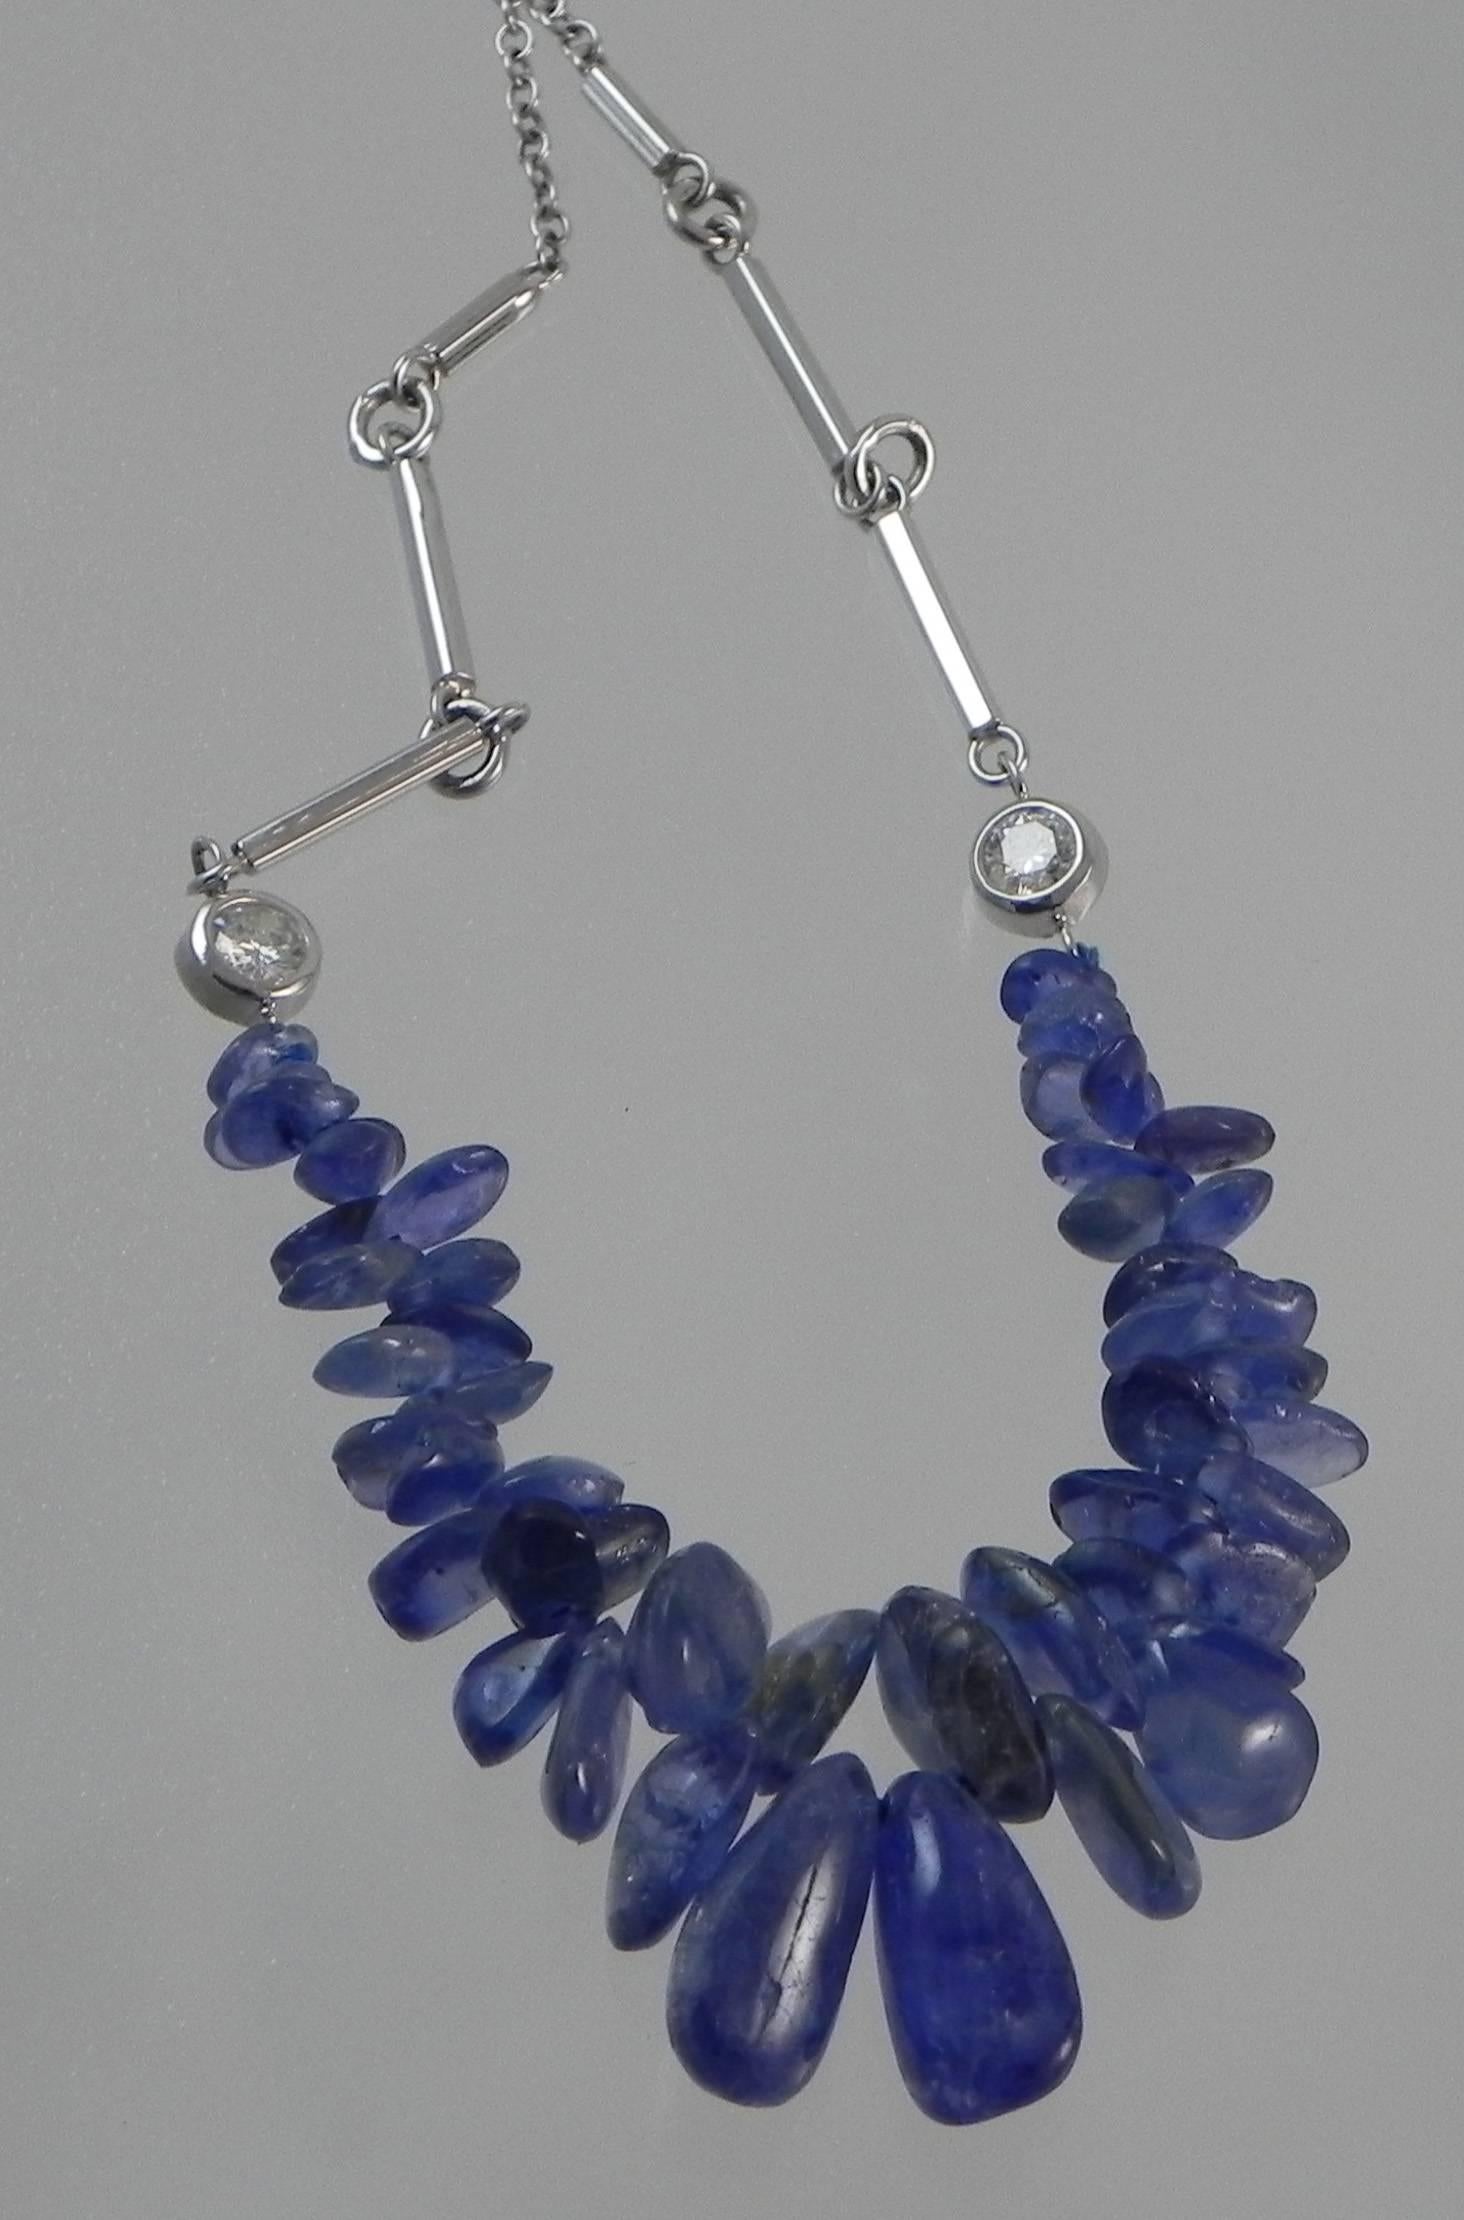 A 14Kt white gold handmade and one-of-a-kind neckpiece by Colorado’s Premier Jewelry Studio and Master Craftsman – Steven M. Parks.  These sapphire crystals were found in the formerly named “Ceylon” now Sri Lanka.  Naturally tumbled by the river,